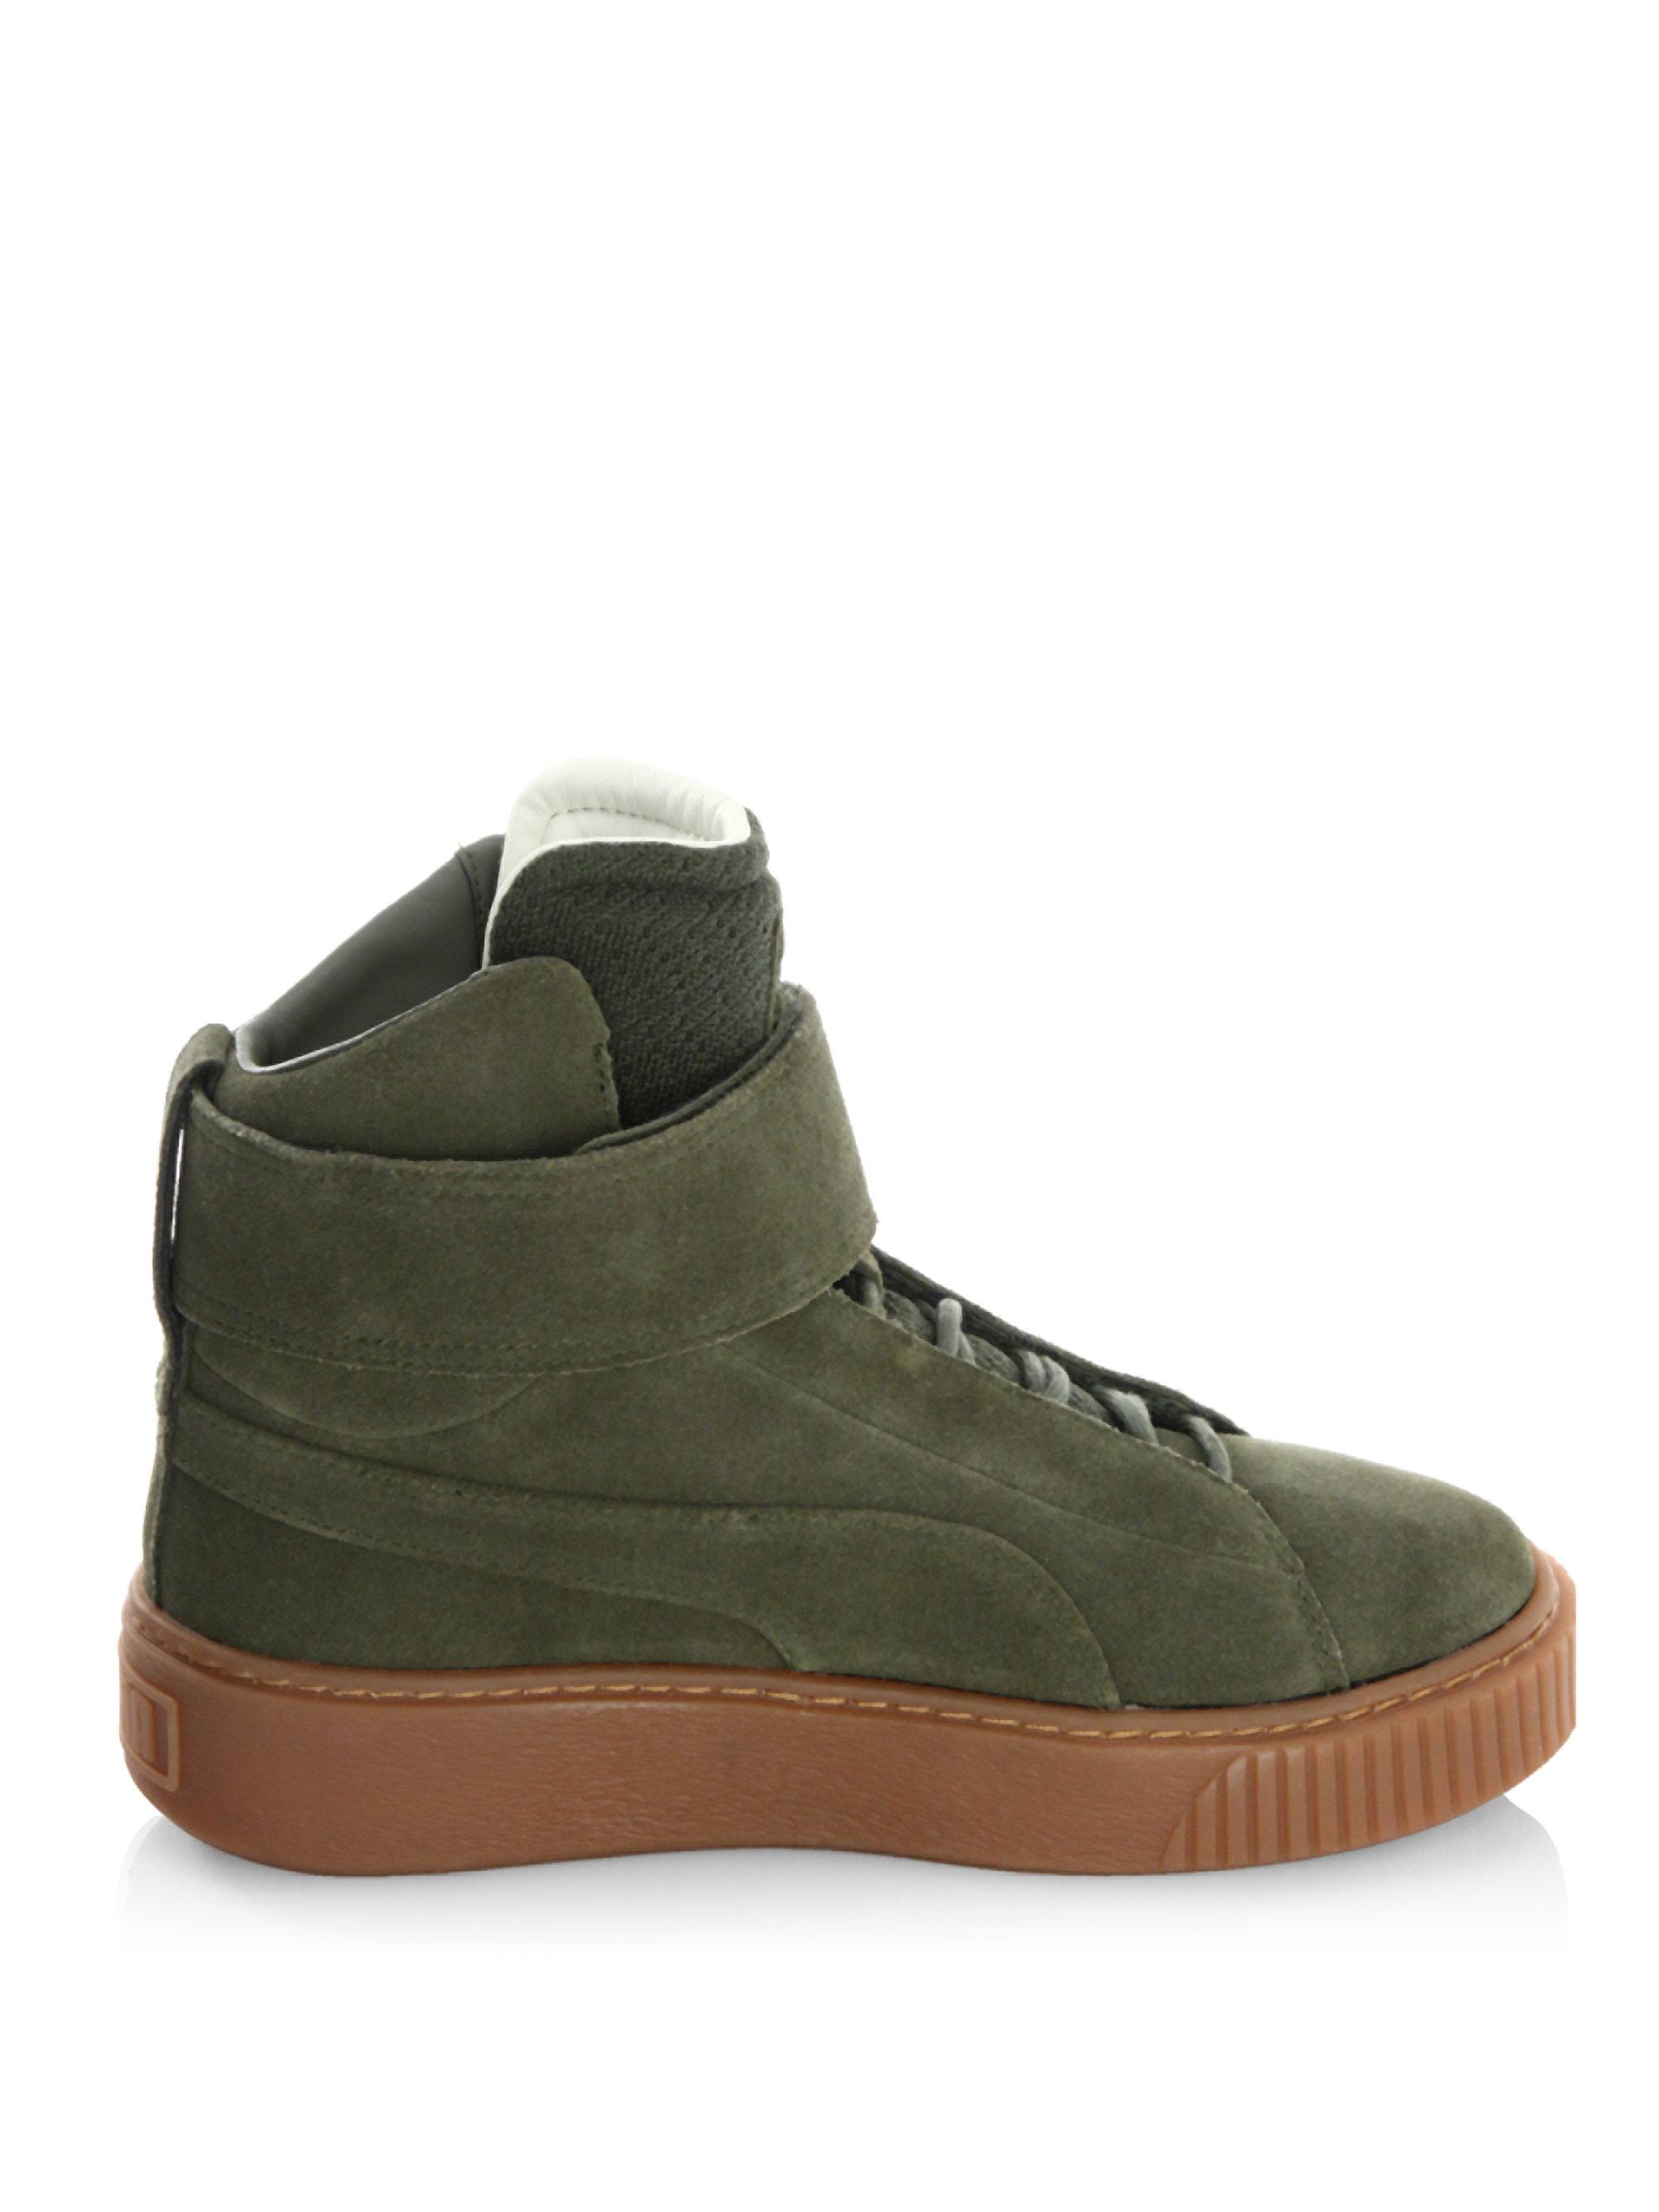 PUMA Suede Mid-top Sneakers in Olive Green (Green) for Men | Lyst